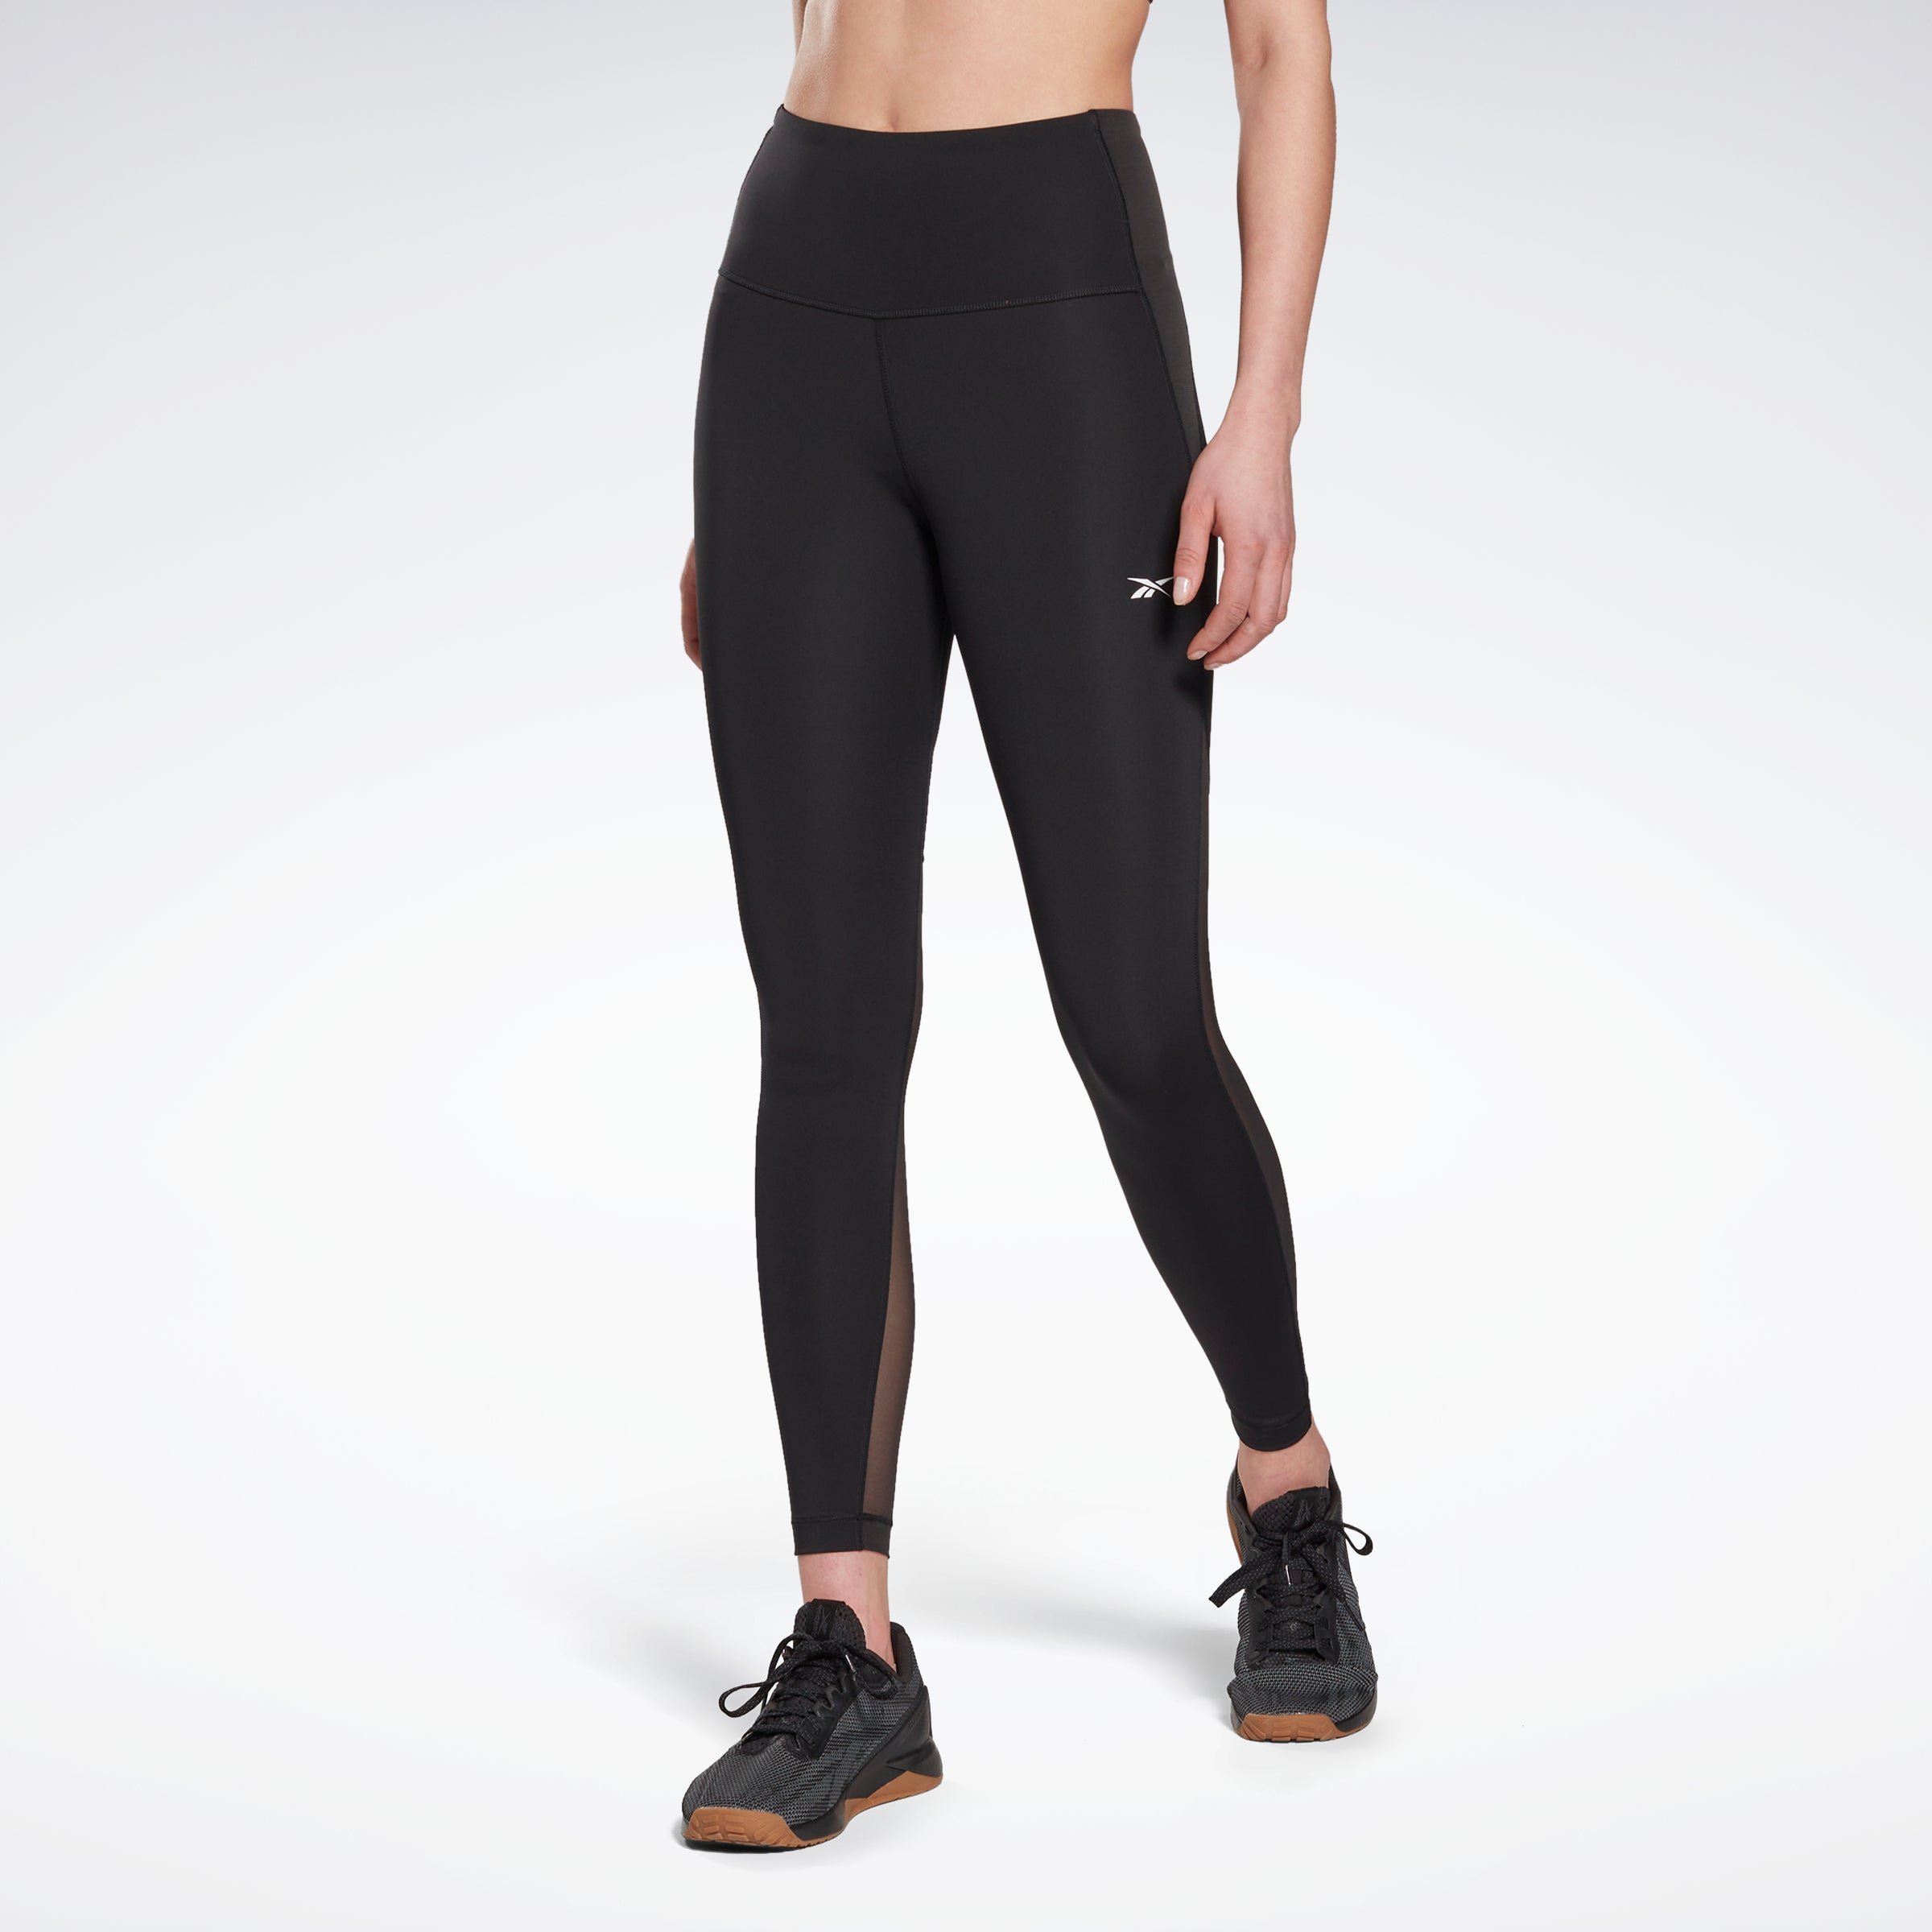 Luxe Lady Fit Launches: The Latest Showstopper Leggings and Sports